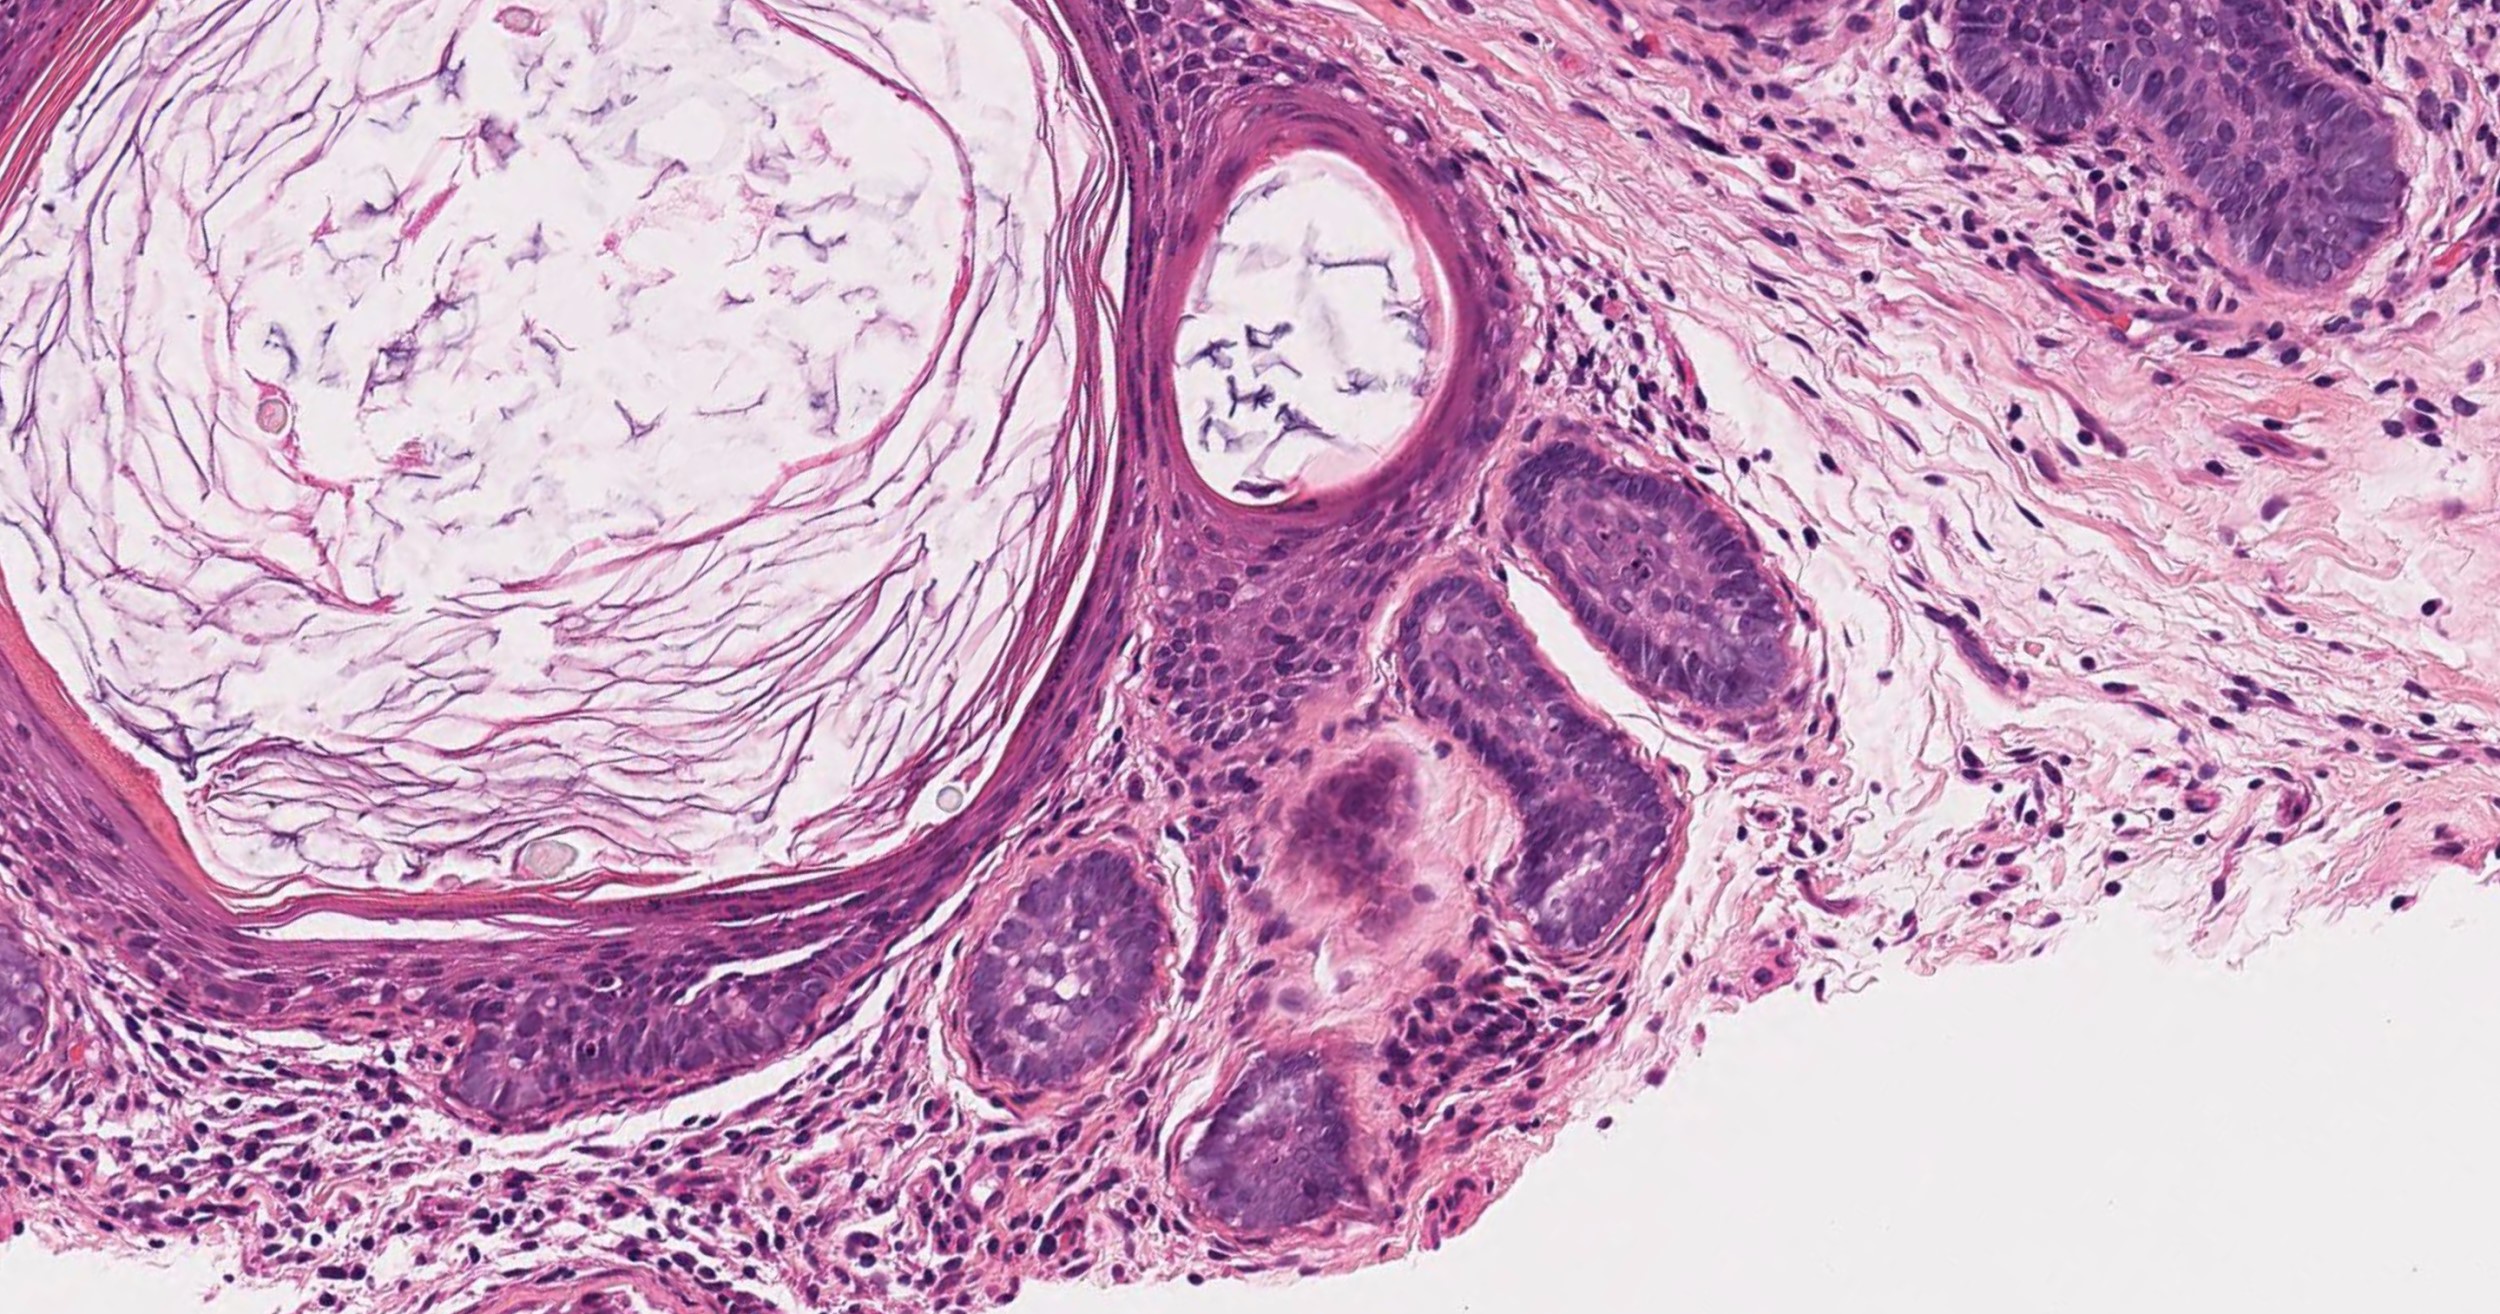 Primary cystic follicle